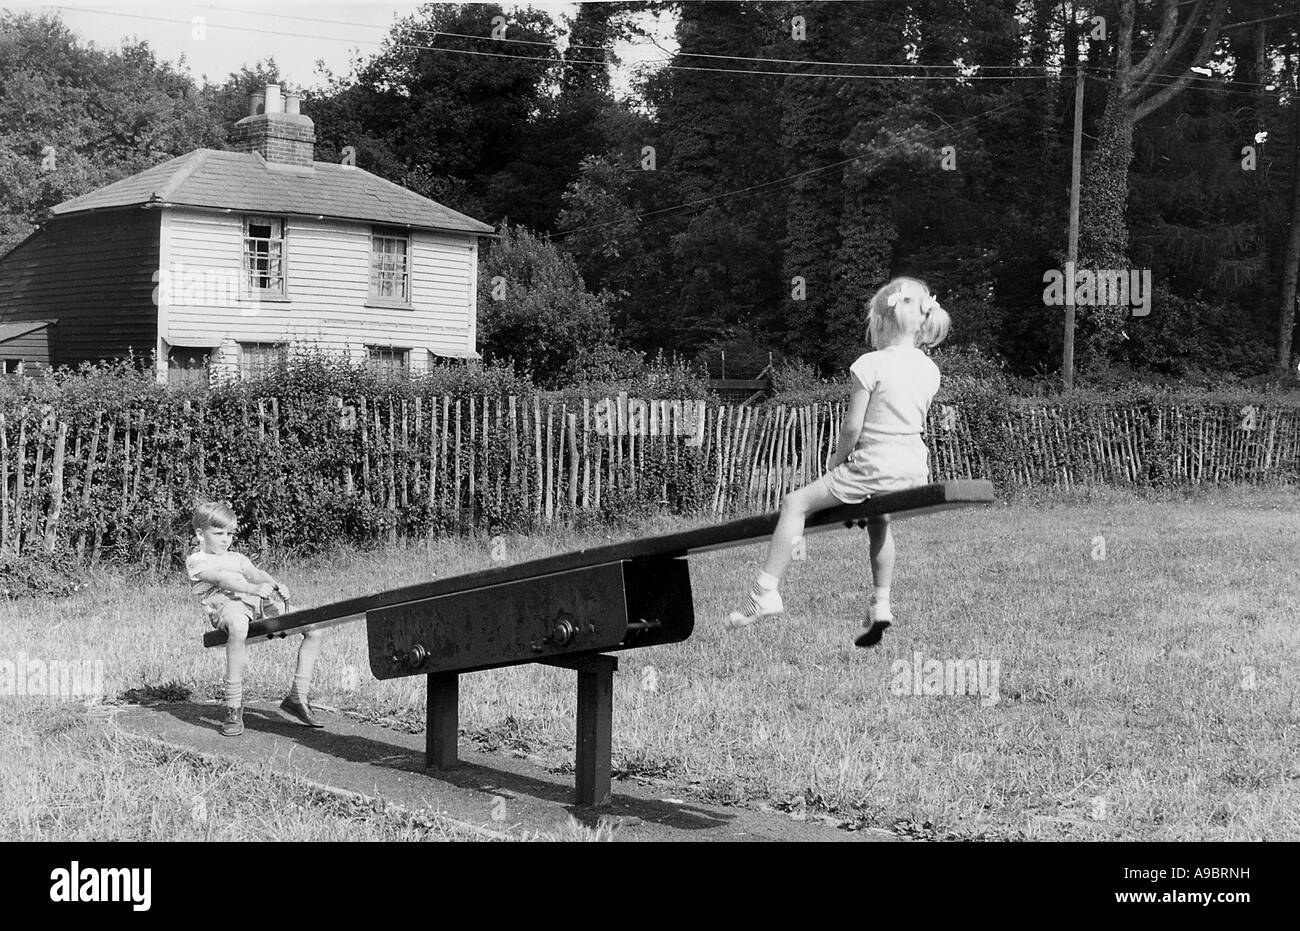 CHILDREN ON A SEESAW about 1950 Stock Photo